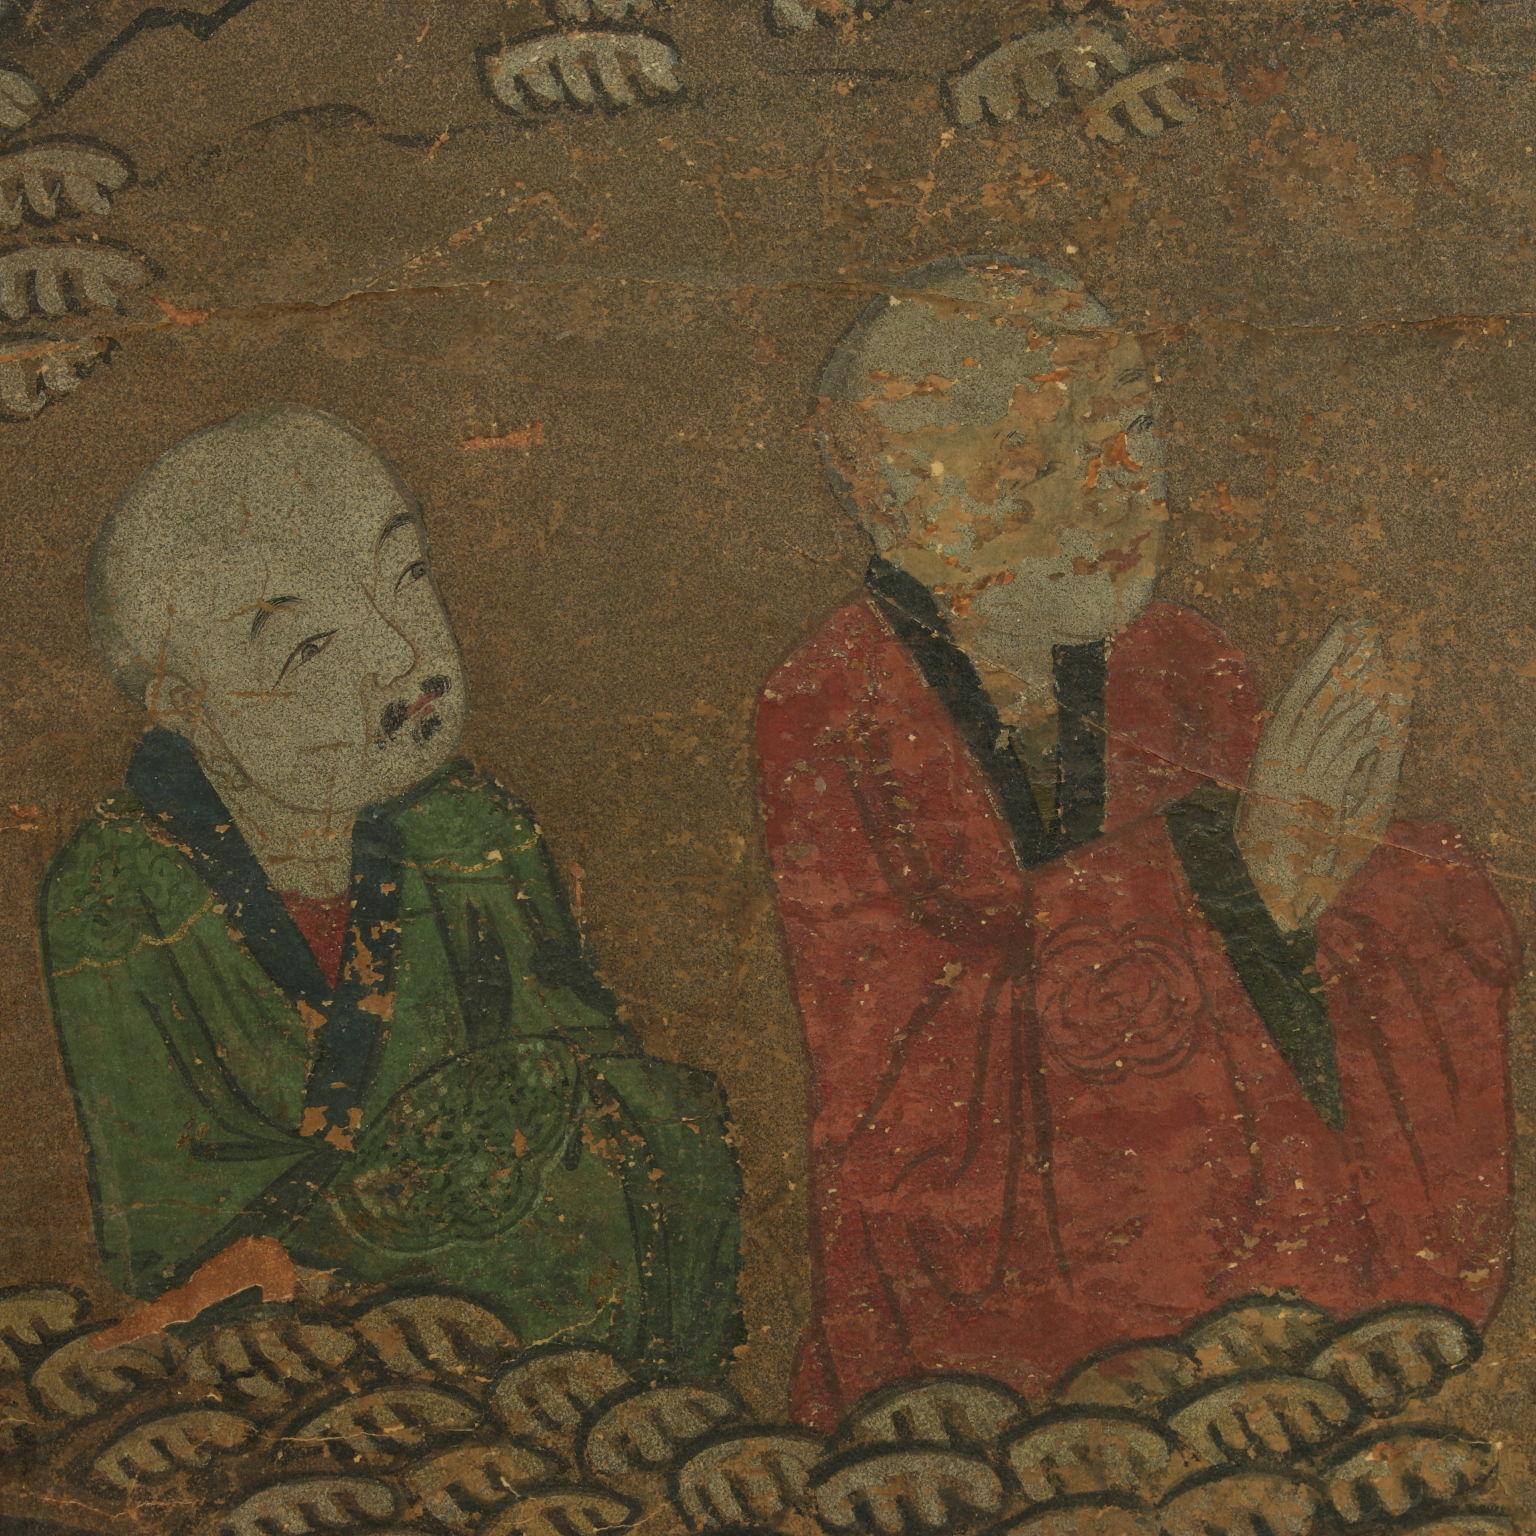 Tempera on Paper Panels China, end 18th century for Europe 2